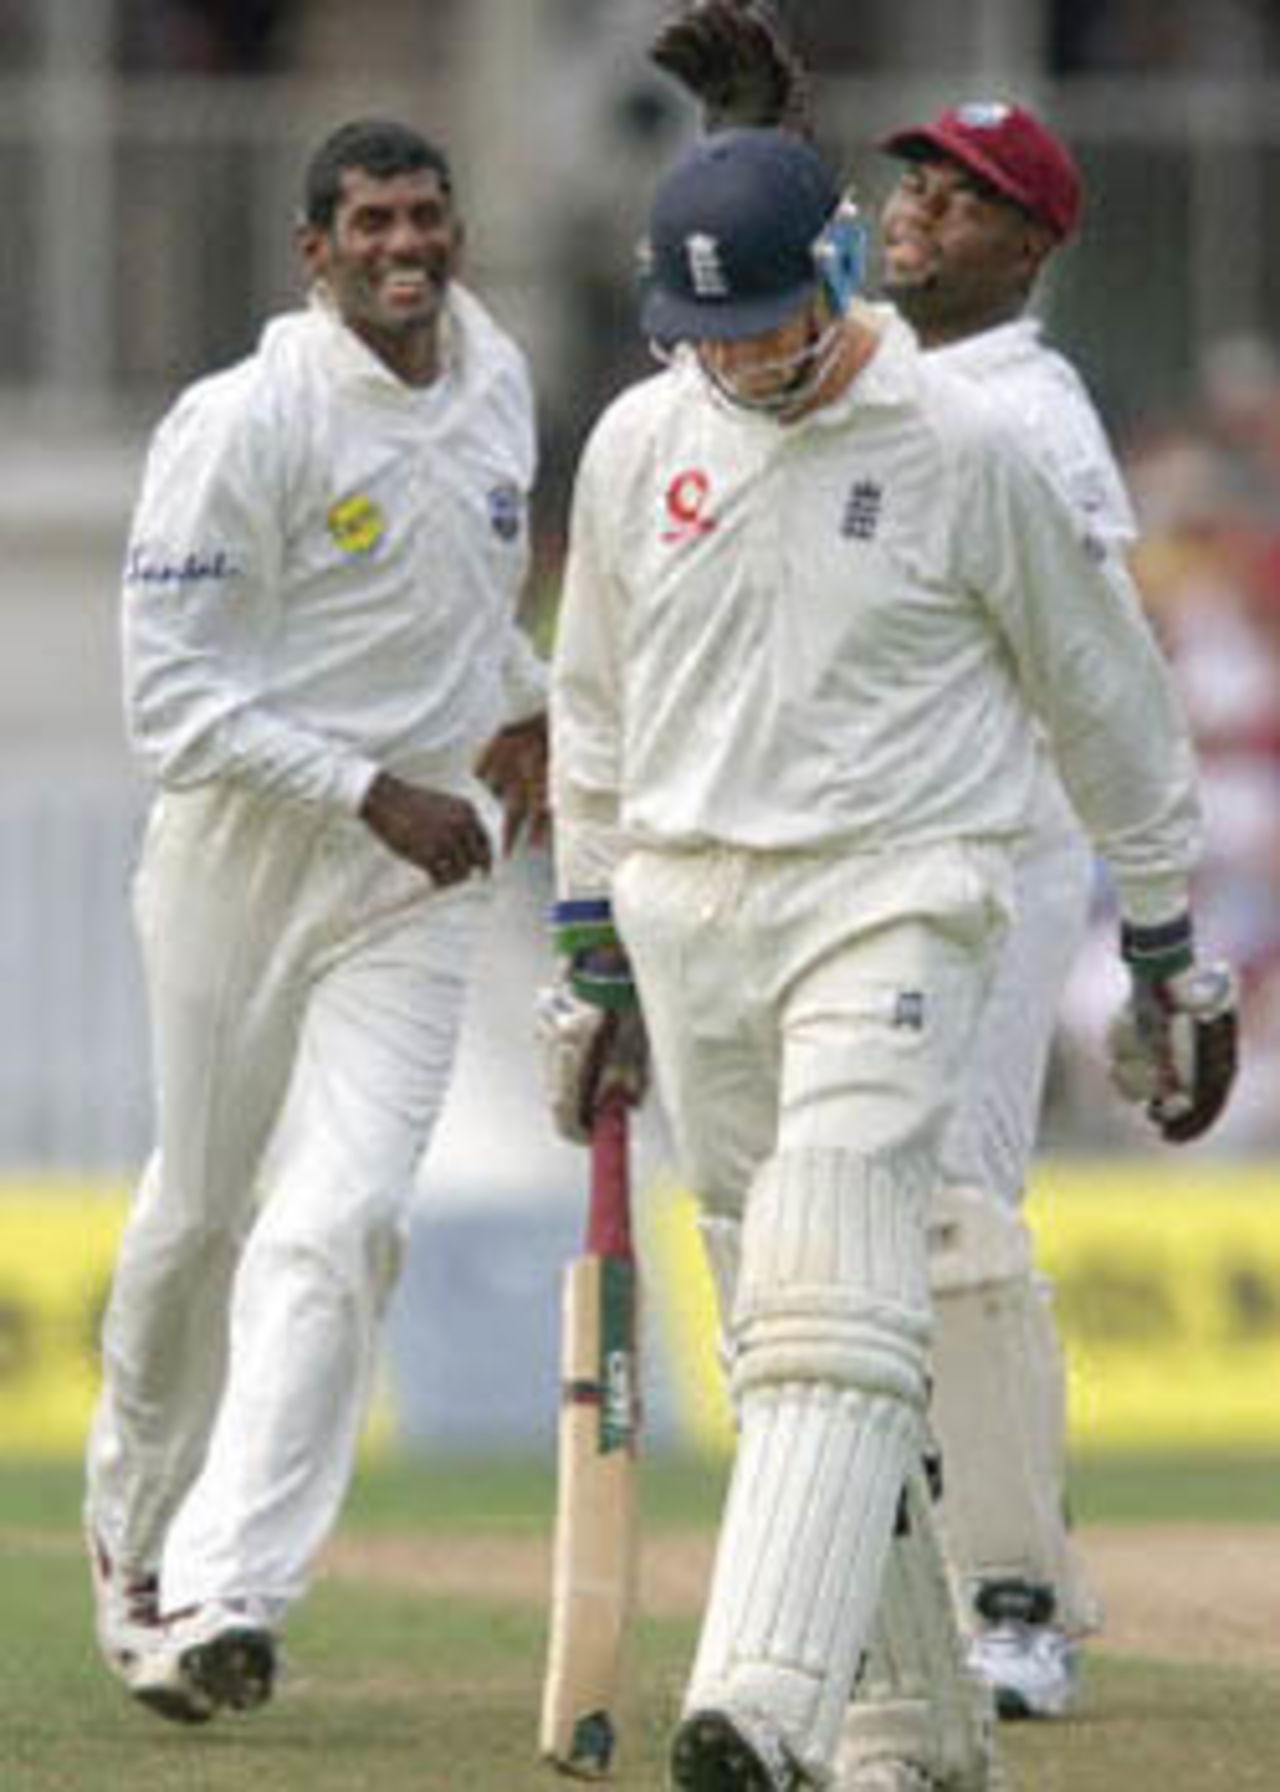 England's opening batsman Marcus Trescothick (R) walks off after being caught while West Indies bowler Mahendra Nagamootoo (L) celebrates shortly before the afternoon interval during Fifth Test against the West Indies at the Oval in London, Trescothick scored 78. The Wisden Trophy, 2000, 5th Test, England v West Indies, Kennington Oval, London, 31Aug-04Sep 2000 (Day 1)